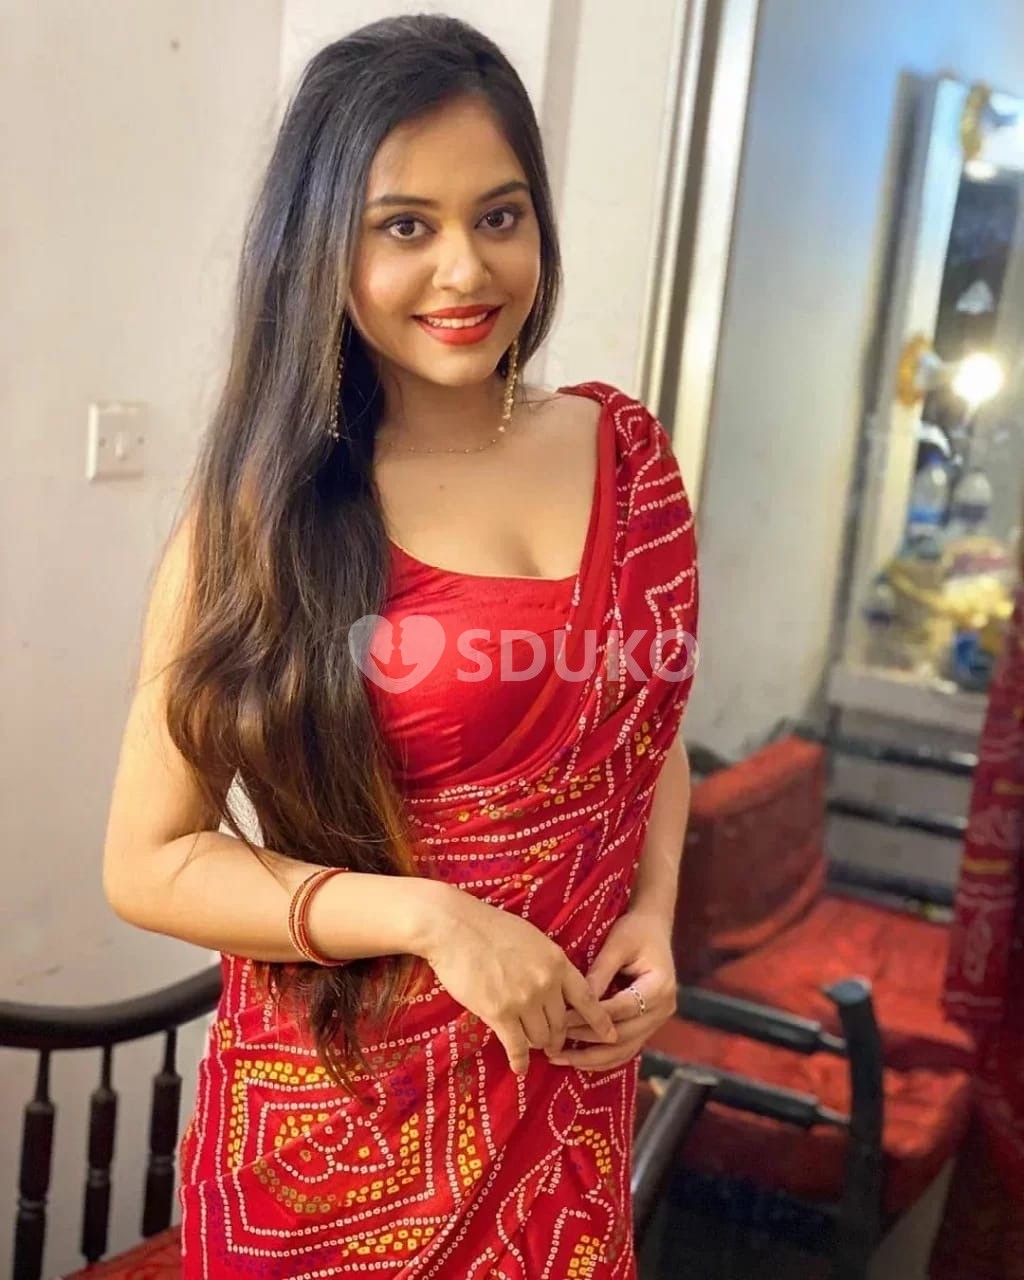 MG ROAD VIP BEST ESCORT  ❣️ HARD SEX DOORSTEP OUT CALL IN CALL GIRLS AND HOUSE WIFE AVAILABLE